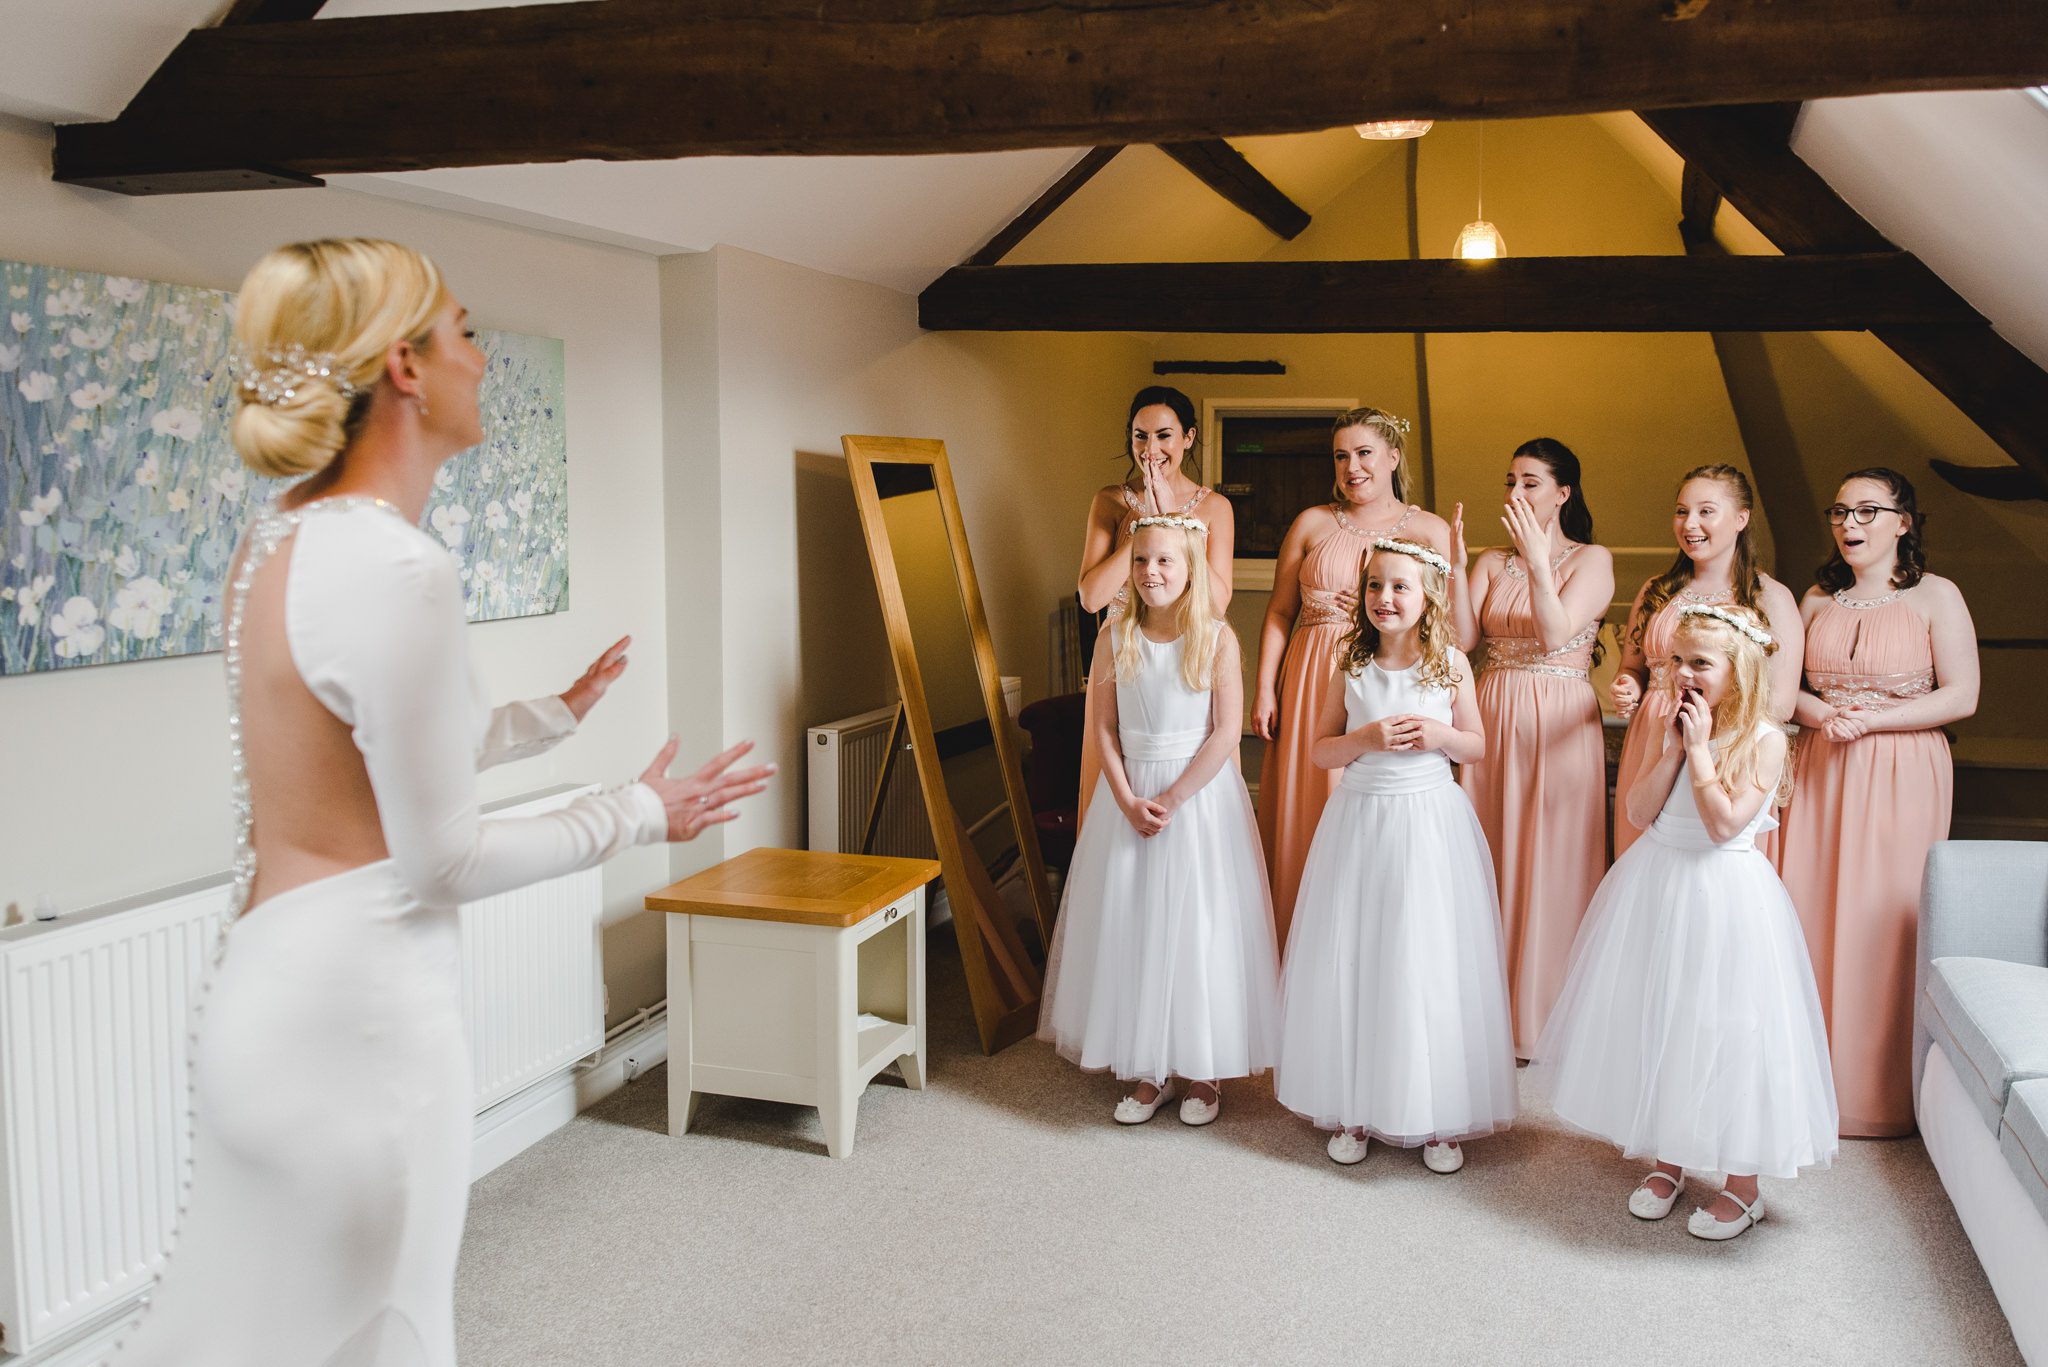 A first look with a bride and her bridesmaids